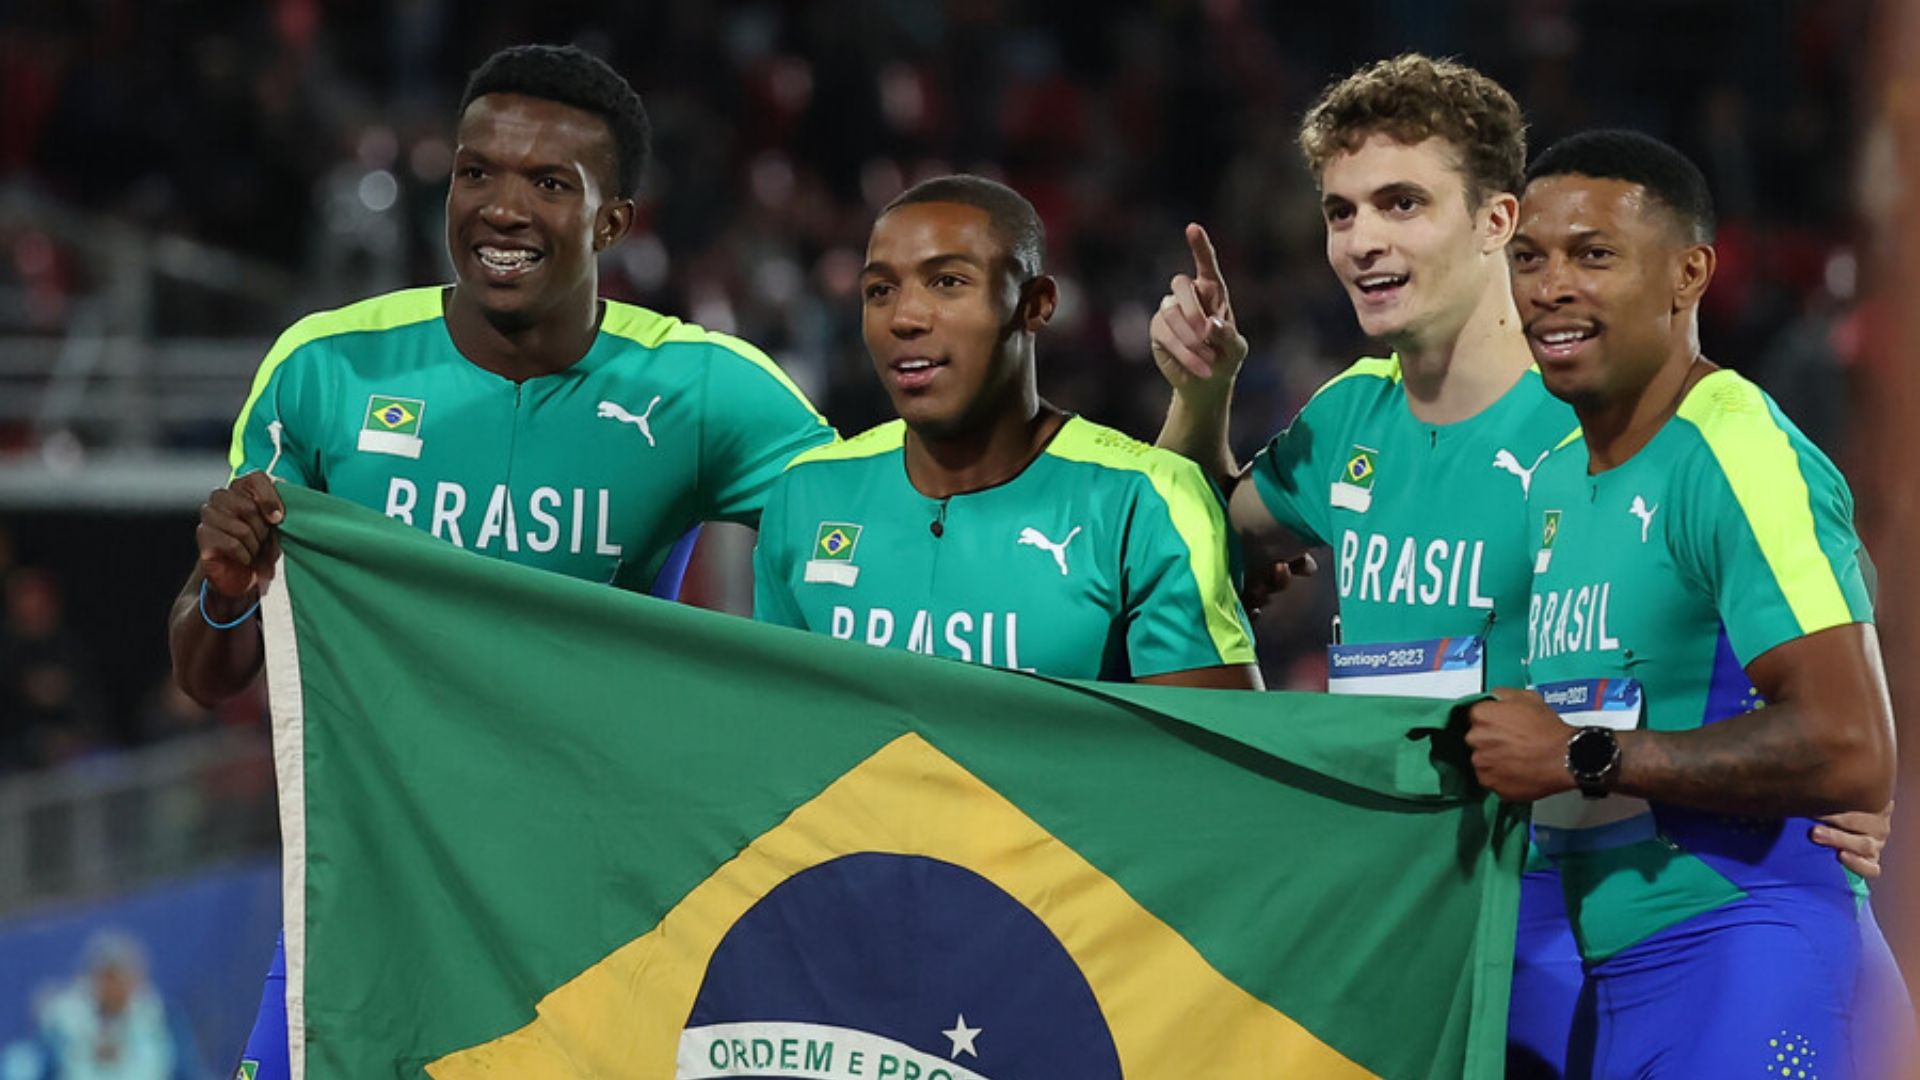 An impressive finish by Renan Correa gives gold to Brazil in the 4x100